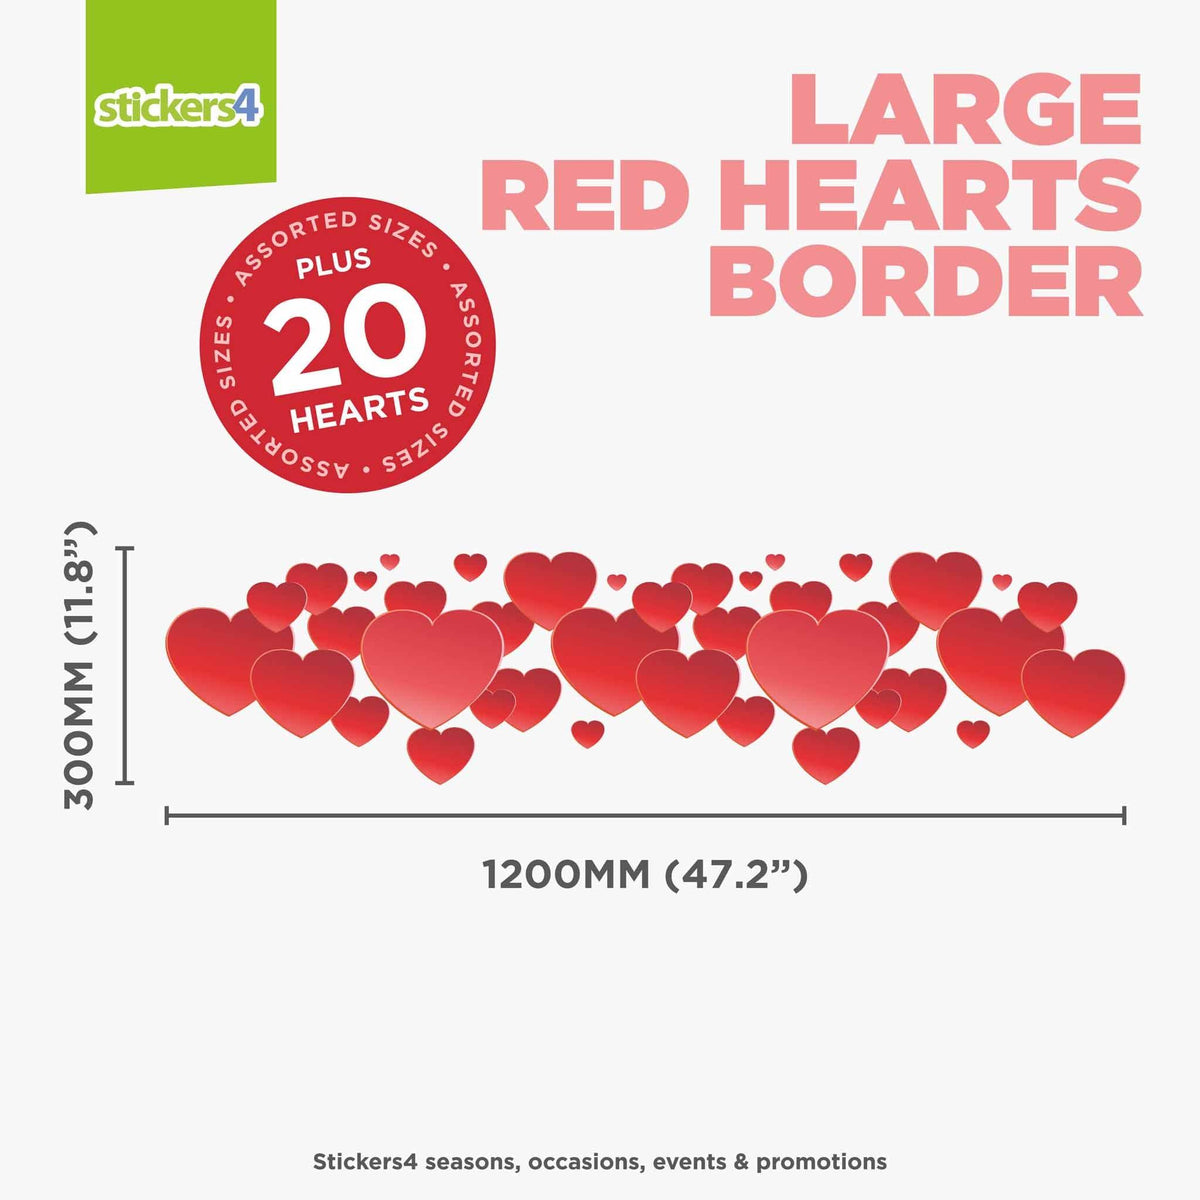 Red Hearts Border (Large) Window Cling Sticker